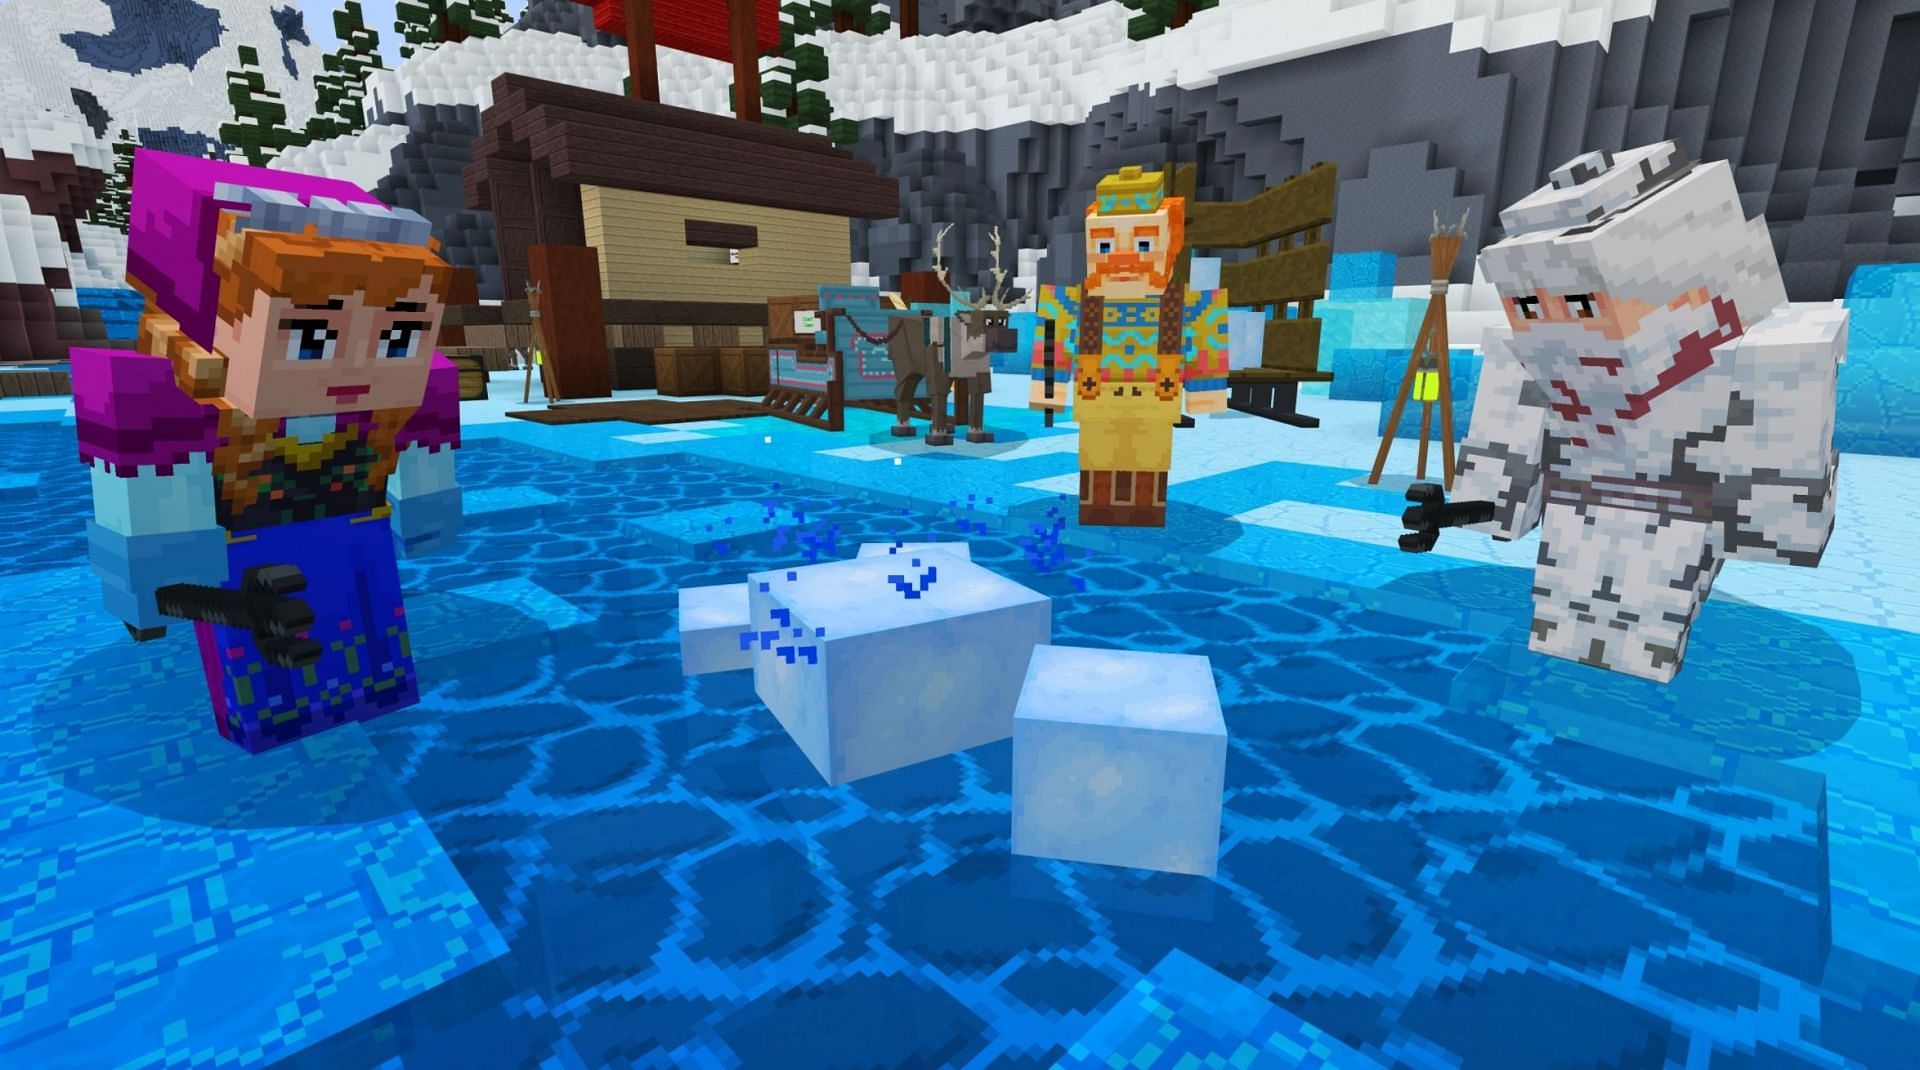 The best Minecraft maps can provide hours of entertainment in a multiplayer environment (Image via Minecraft.net)